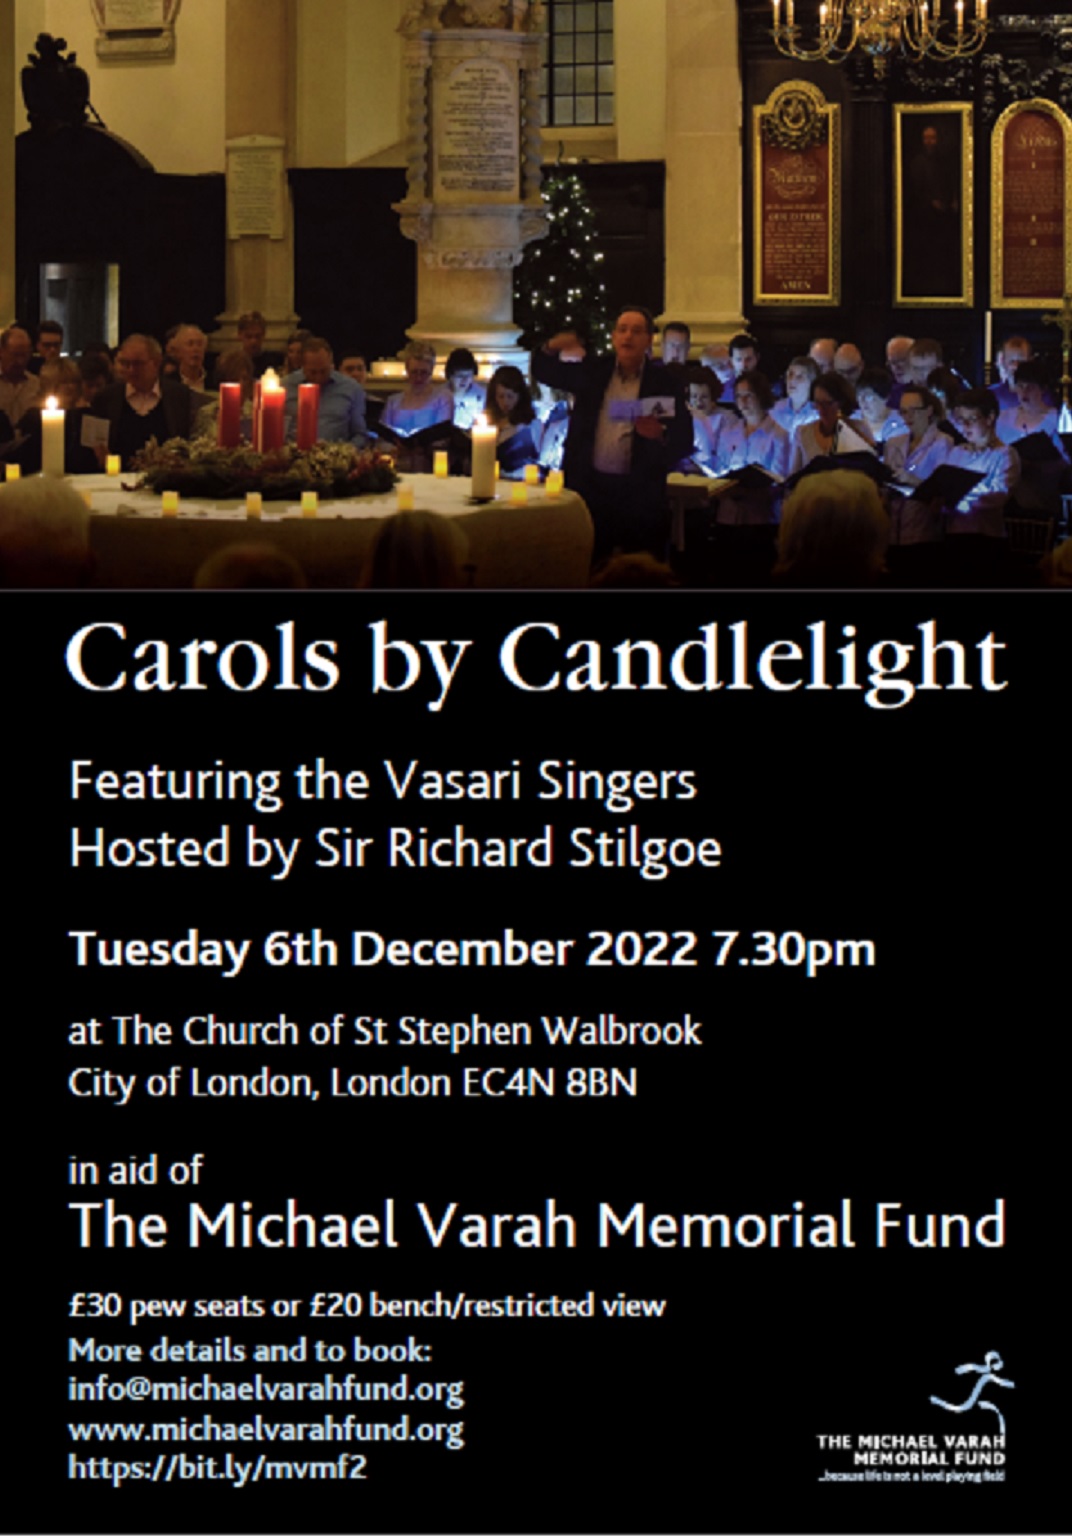 Carols by Candlelight – in aid of the Michael Varah Memorial Fund